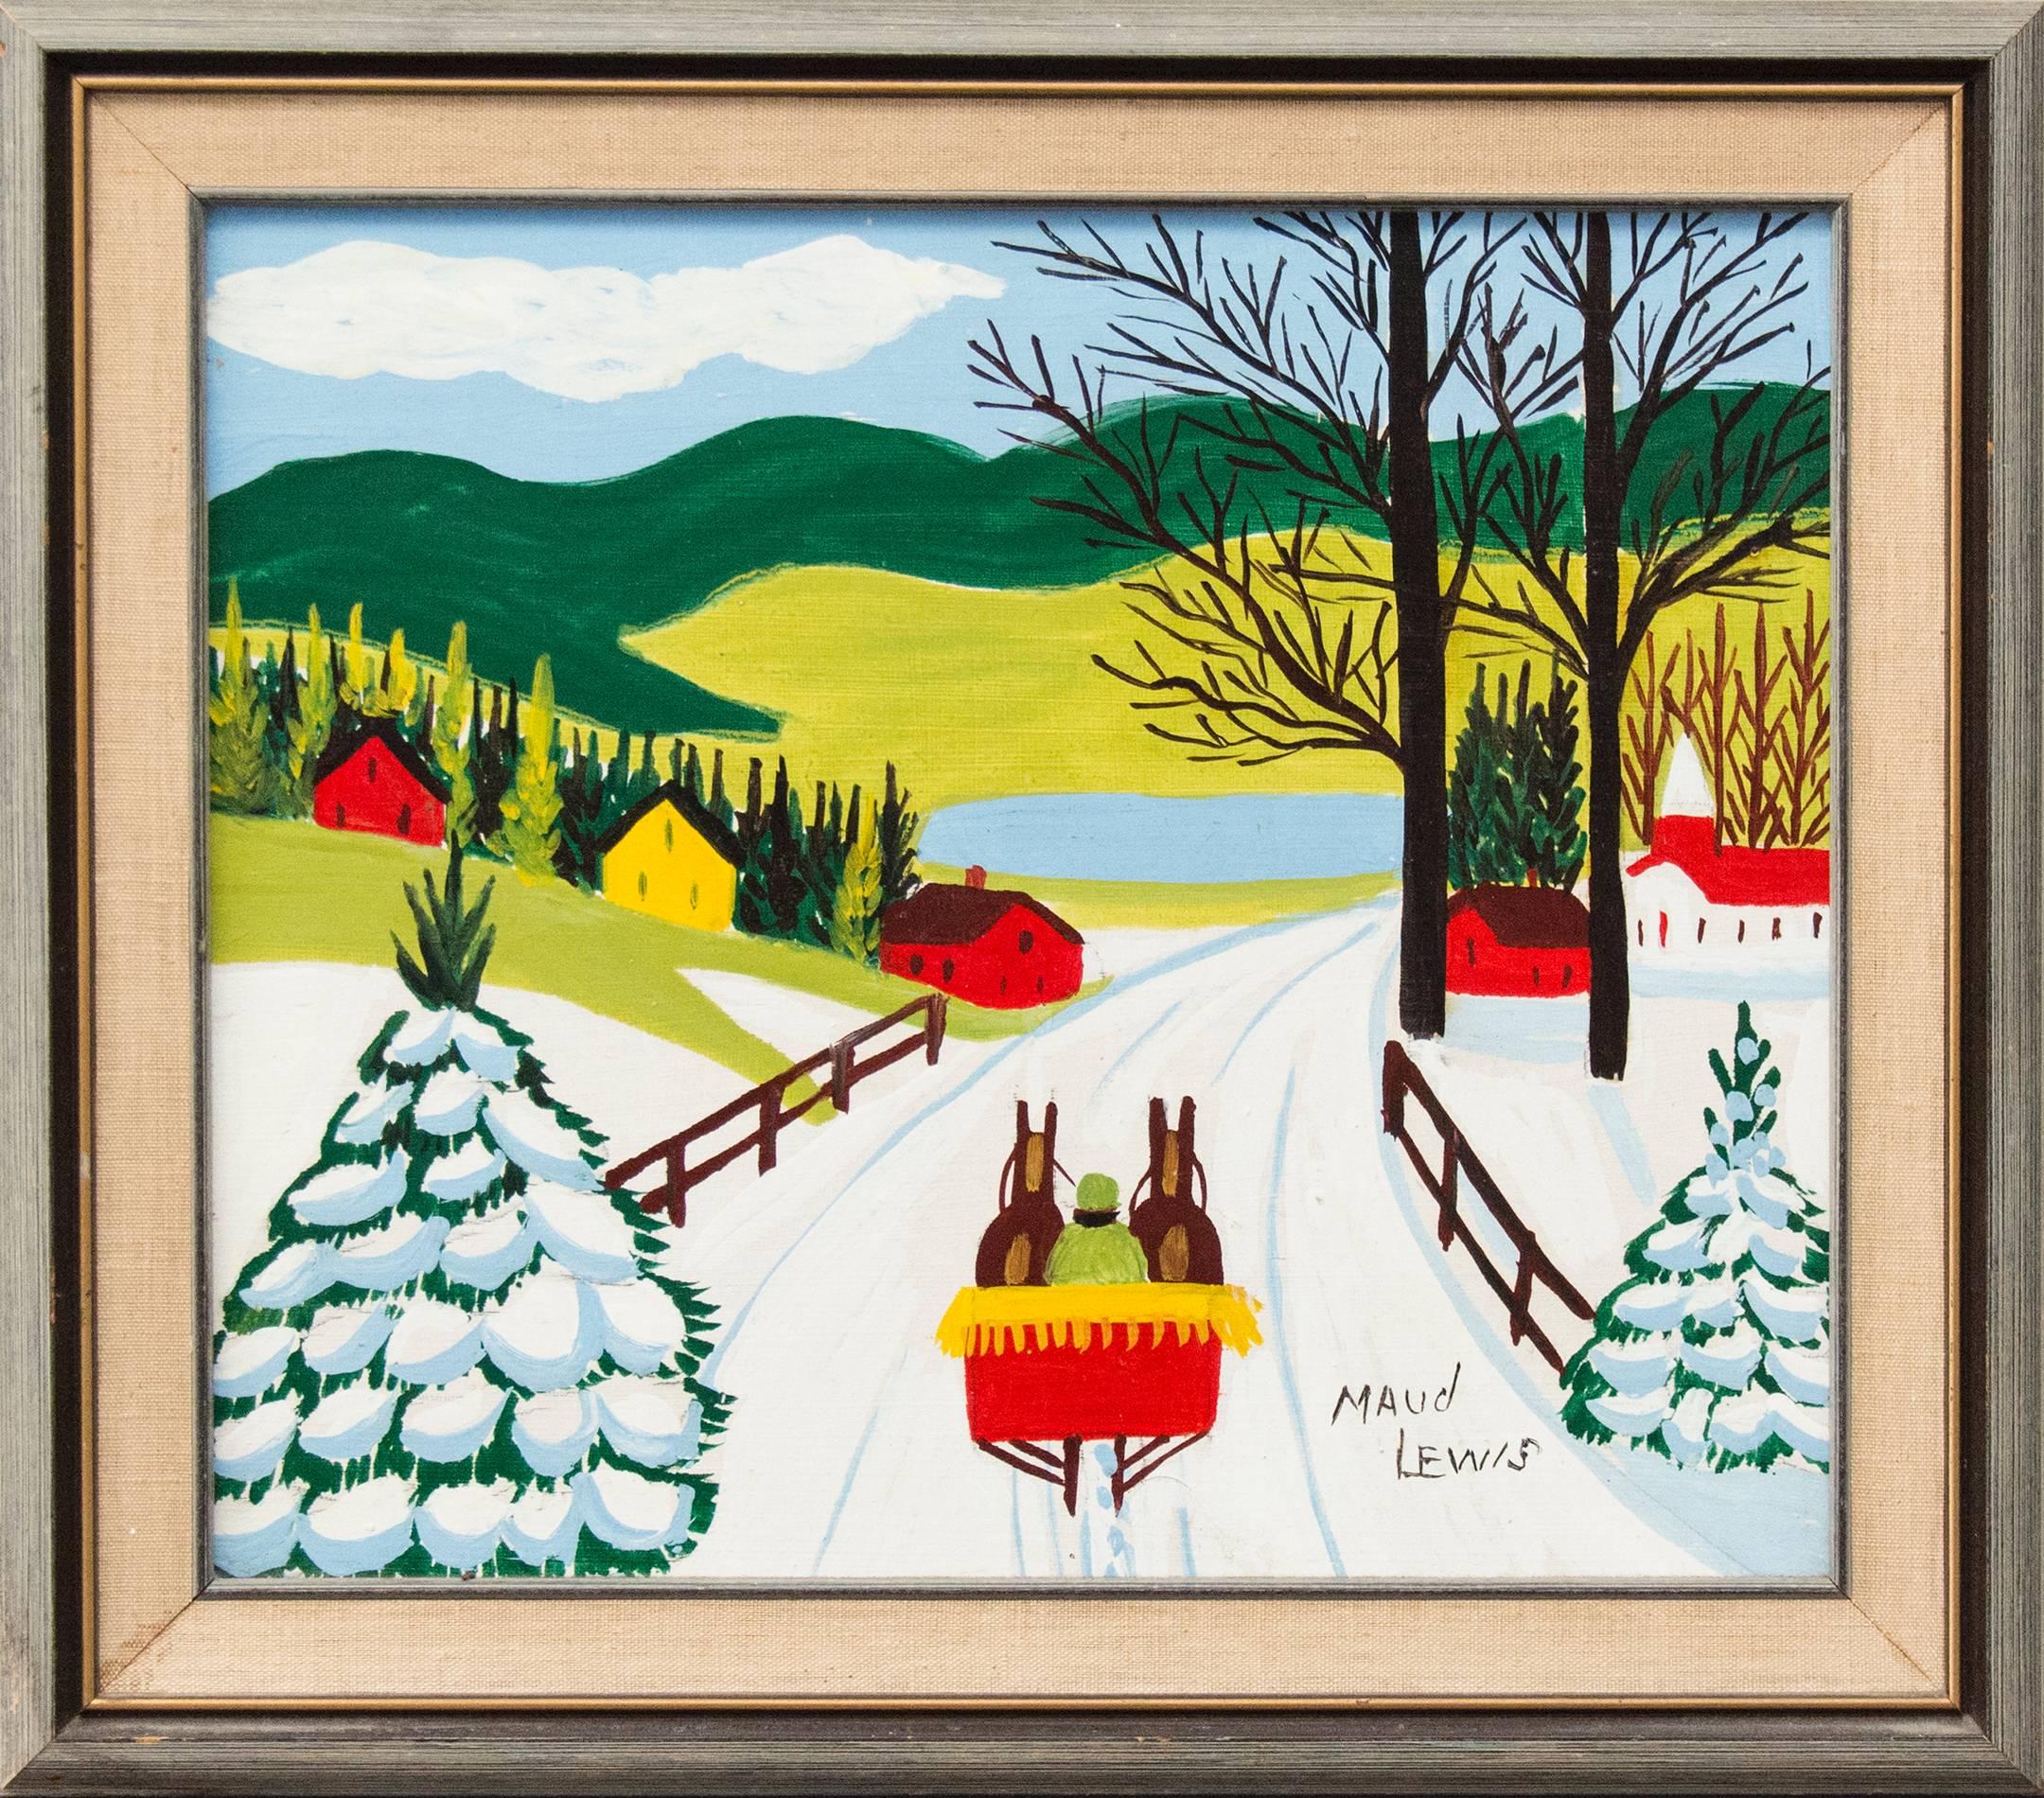 Sleigh Ride to Lake - Painting by Maud Lewis